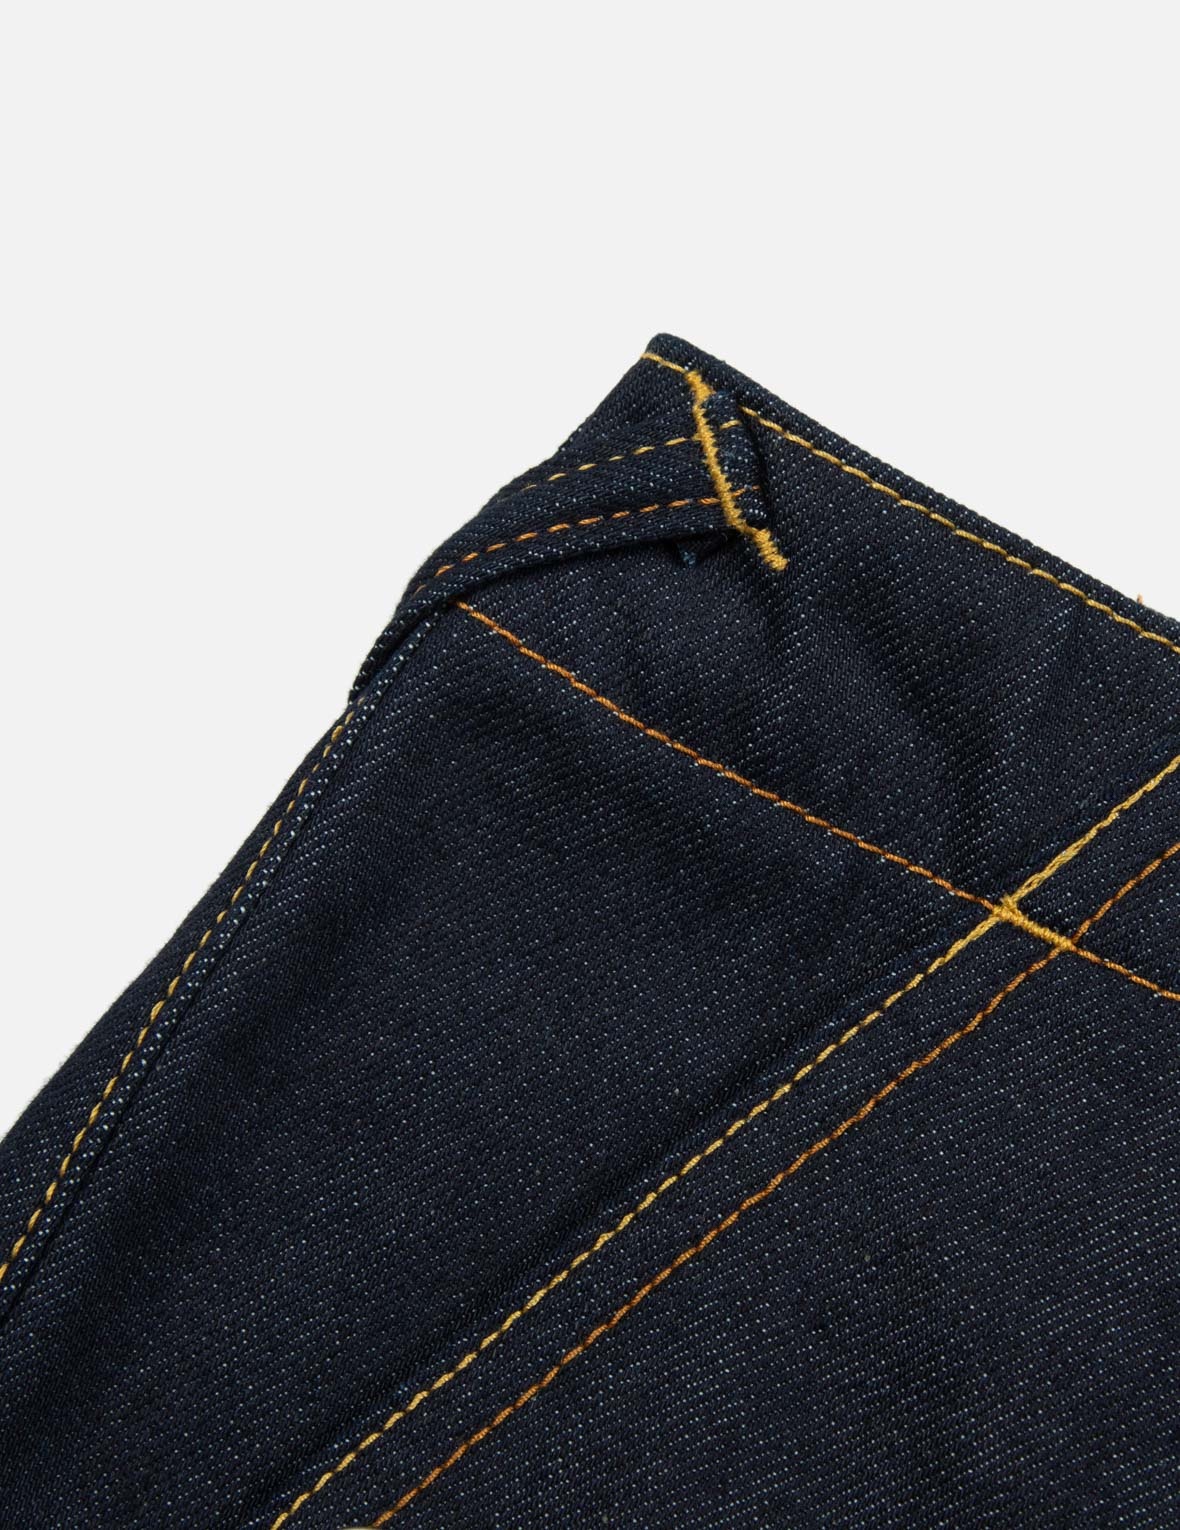 SEAGULL EMBROIDERY 3D CUT JEANS - 8